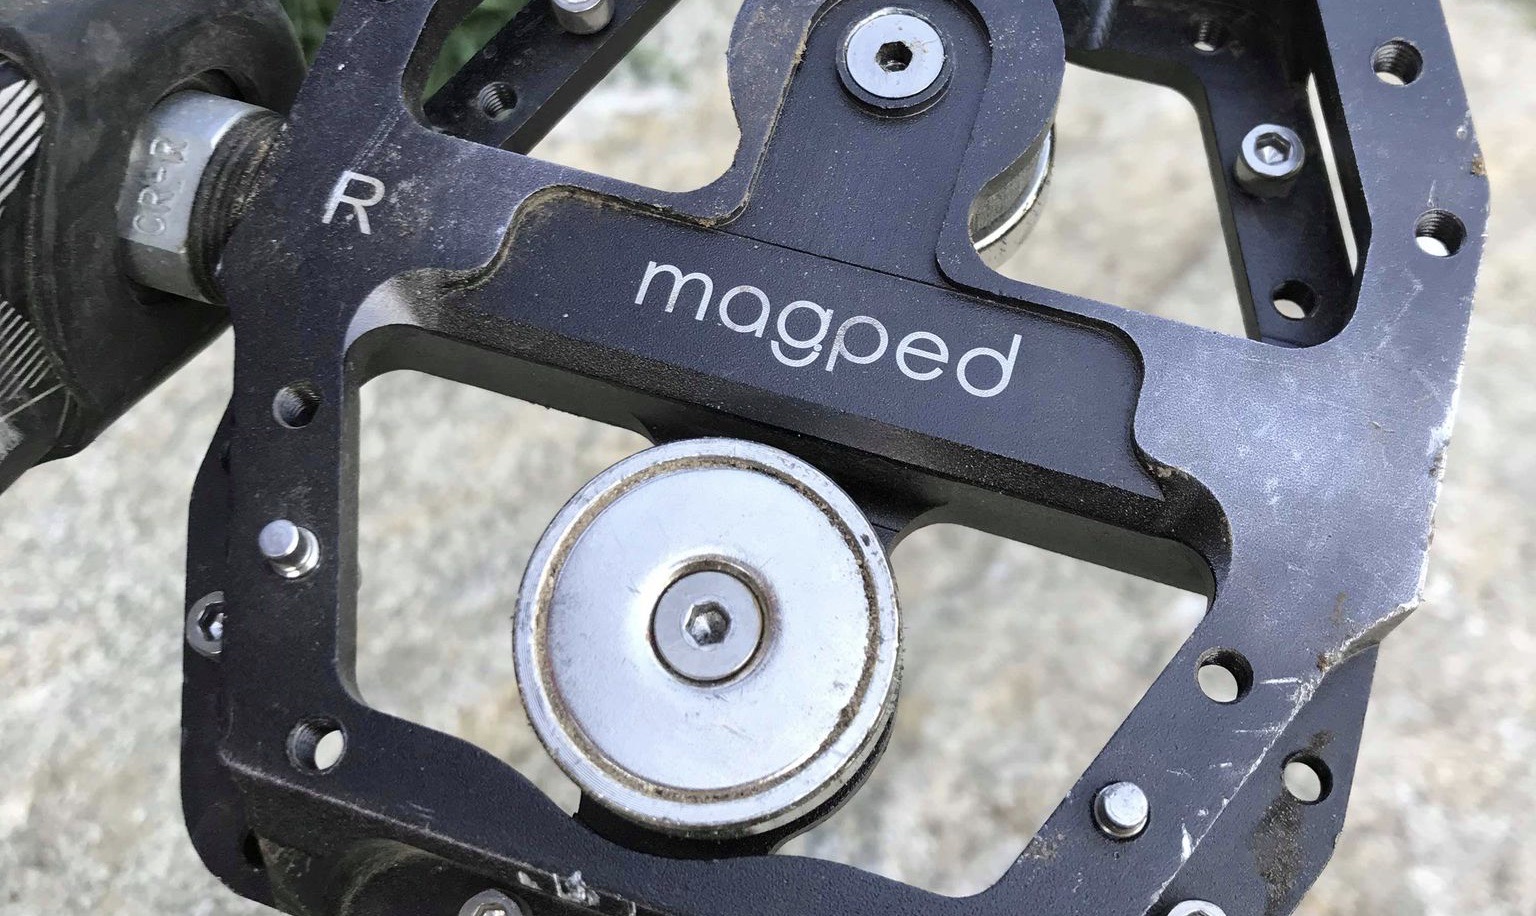 Magped_cover